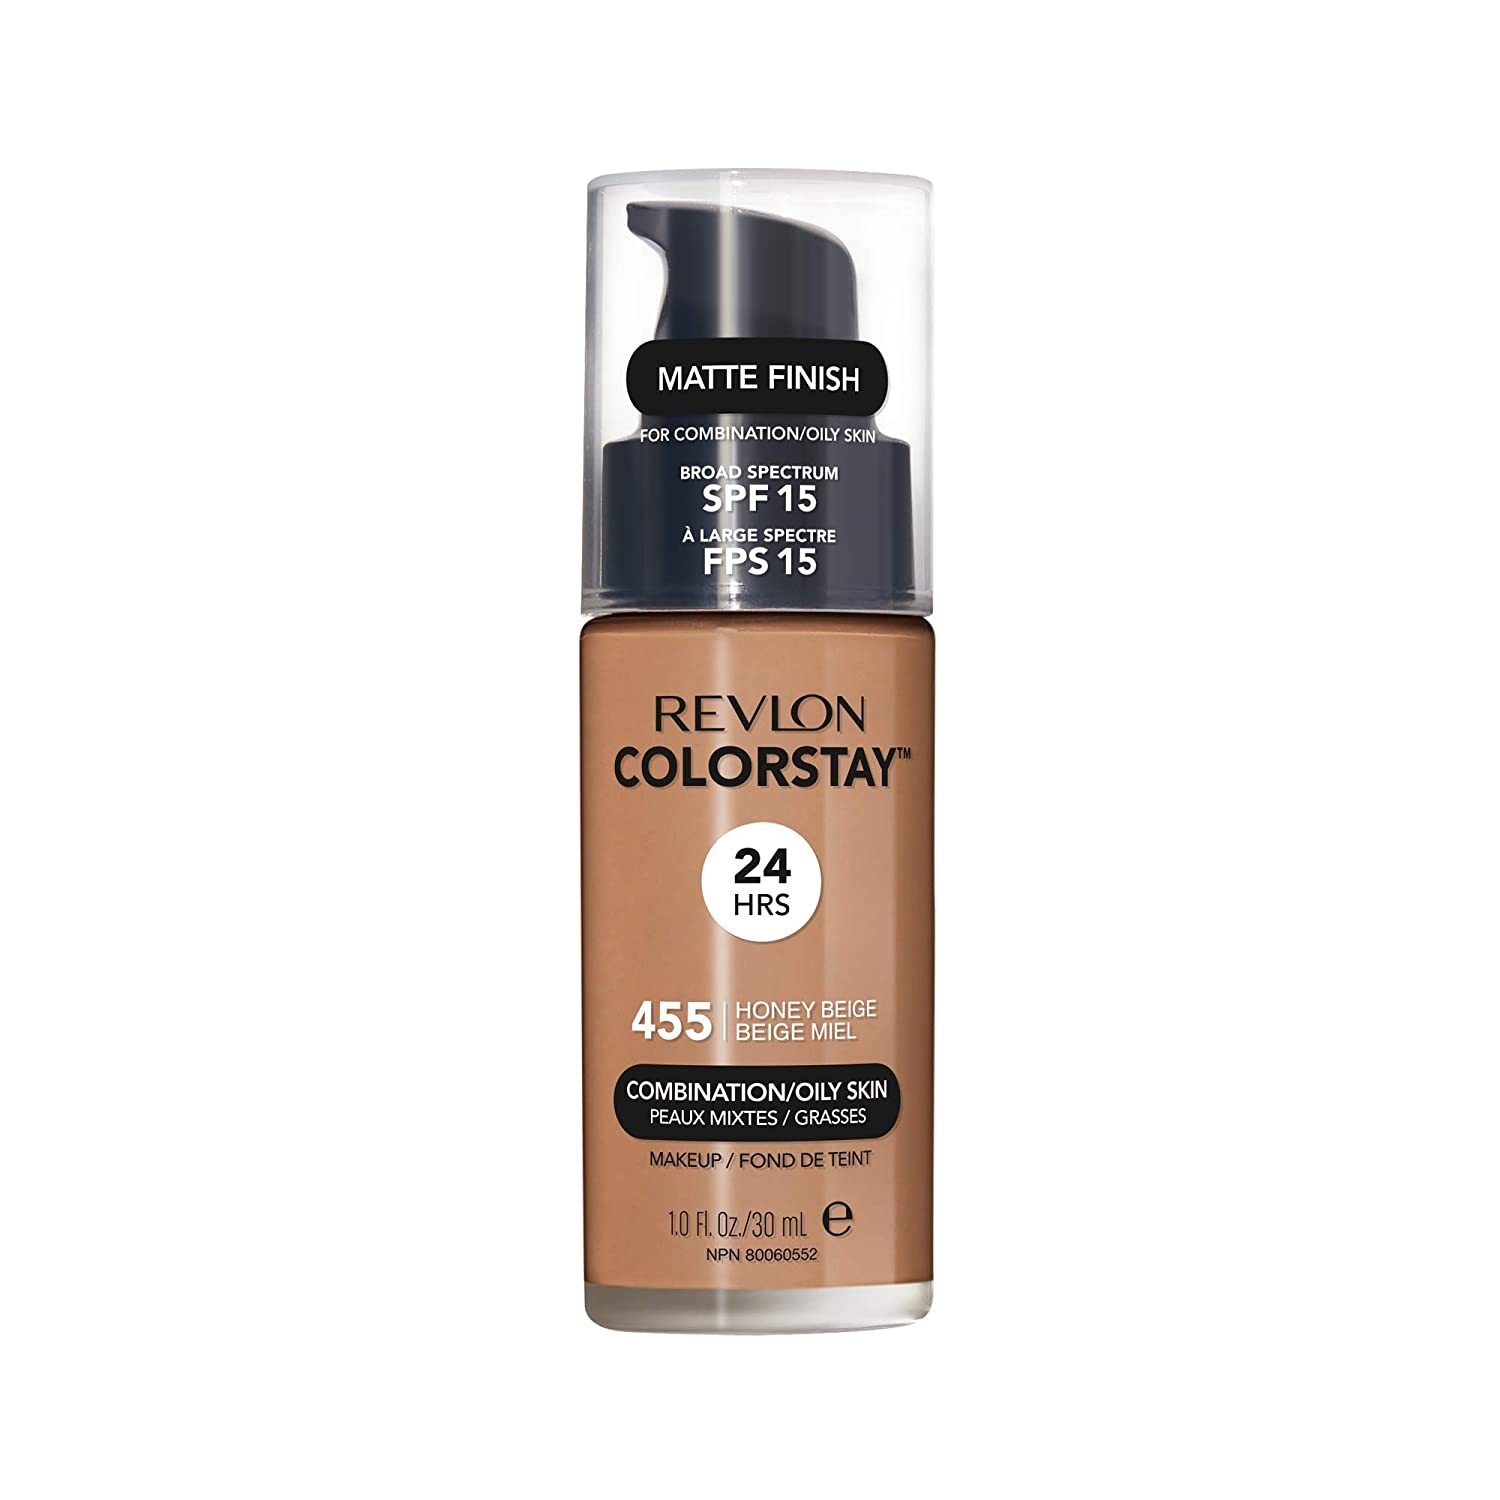 New Revlon ColorStay Liquid Foundation Makeup for Combination/Oily Skin SPF 15